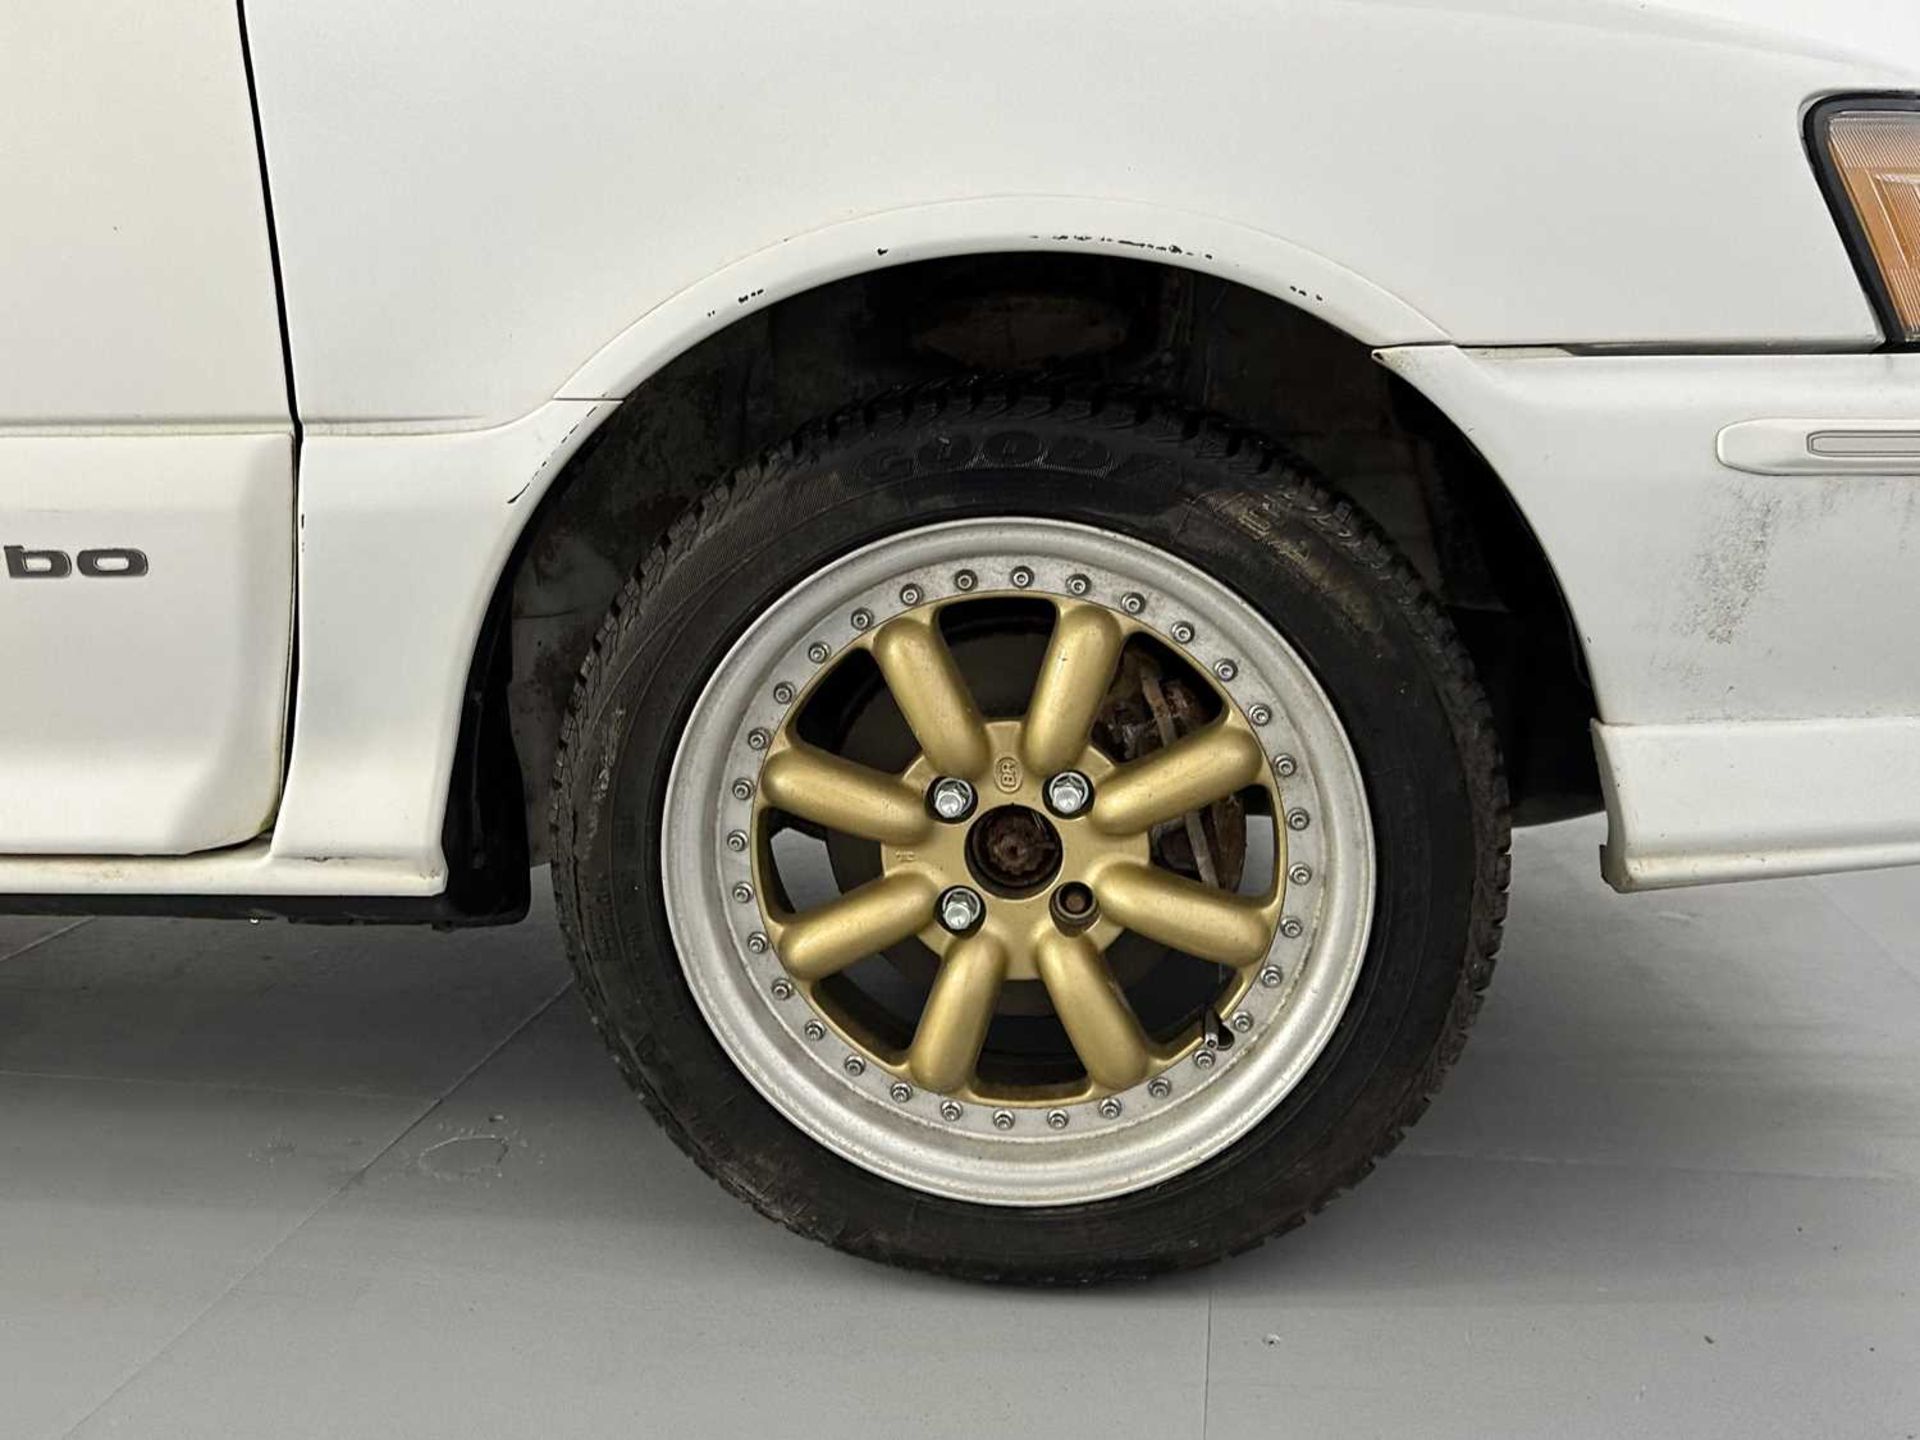 1990 Toyota Starlet GT Turbo - Image 14 of 29